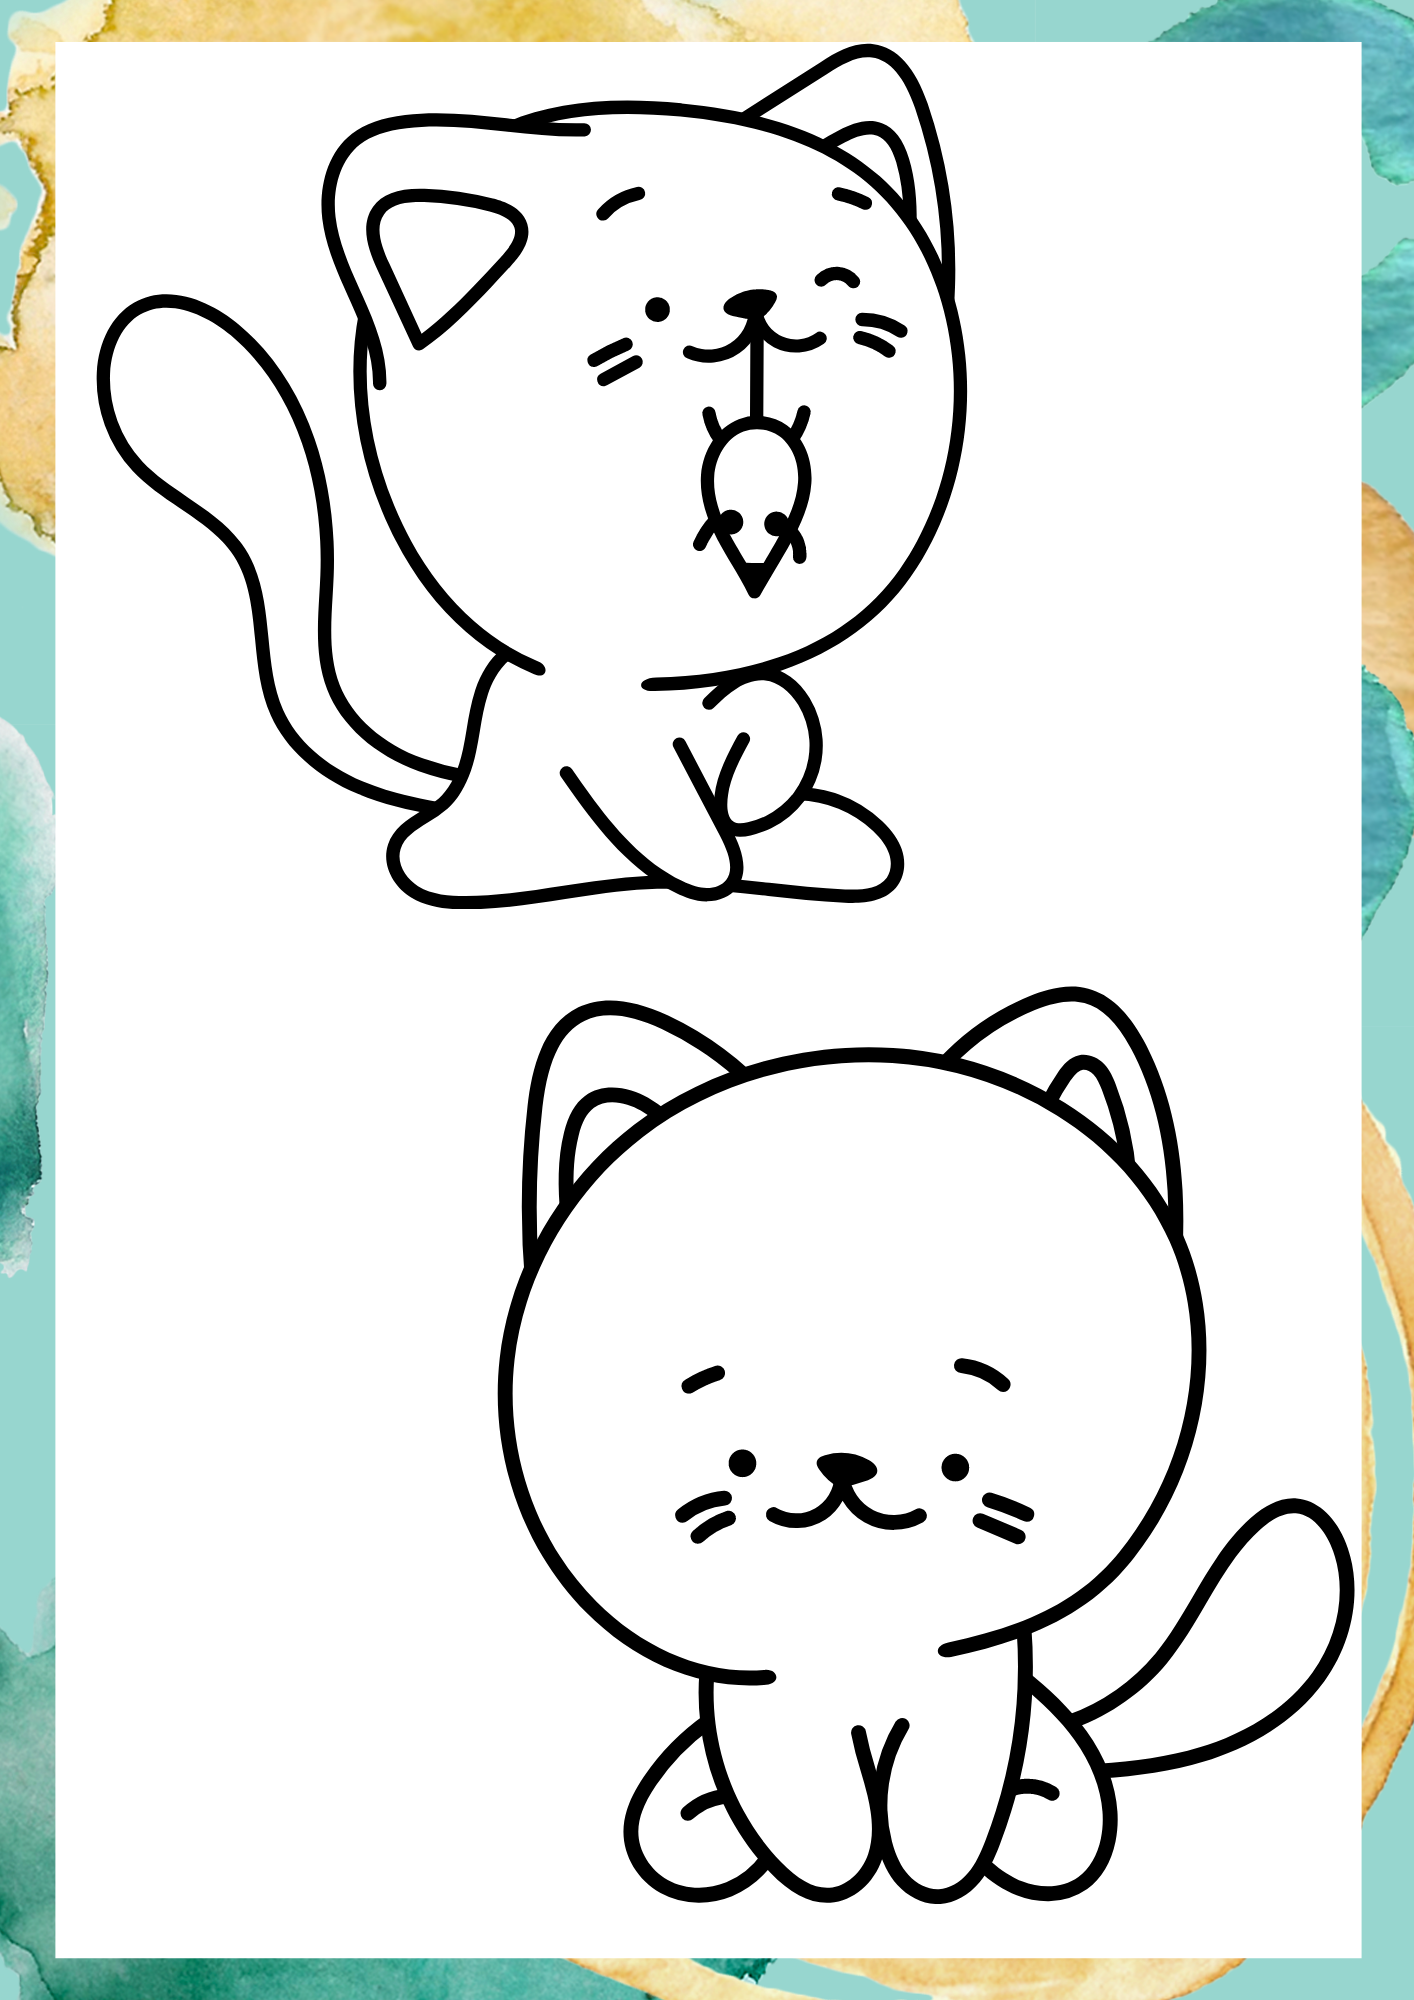 cat coloring page, animal coloring page, coloring page, coloring page for toddlers, Coloring Page, coloring sheet, happy color, colouring, free coloring pages, coloring pages for kids, printable coloring pages, cute coloring pages, colouring pages, colouring to print, free printable coloring pages, free coloring pages for kids, easy coloring pages, coloring sheets